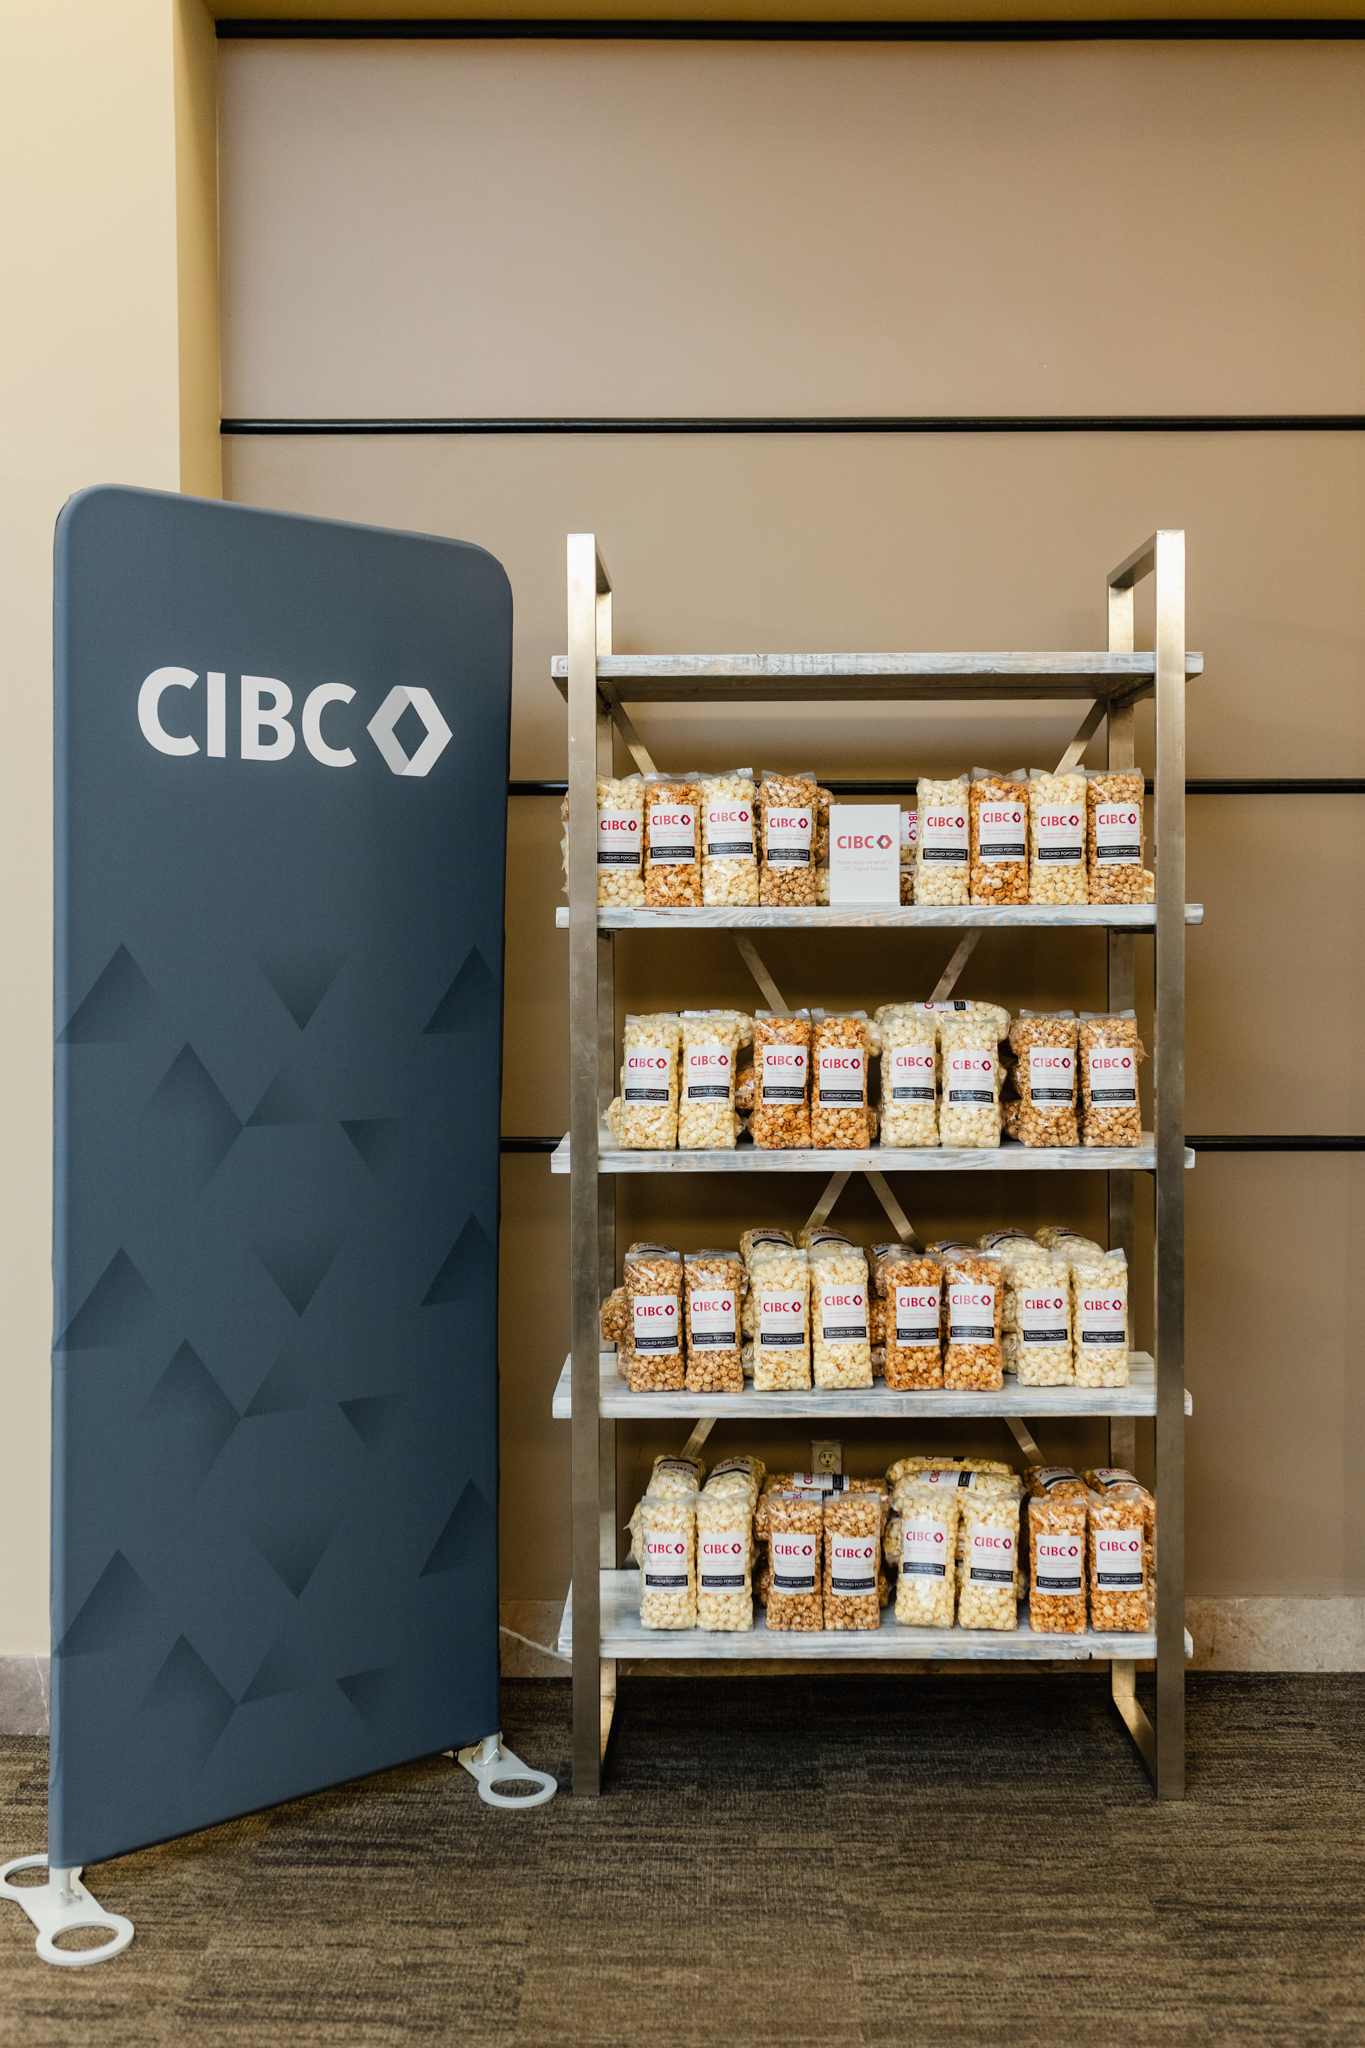 Cibco's food display in the lobby of a building at a conference.